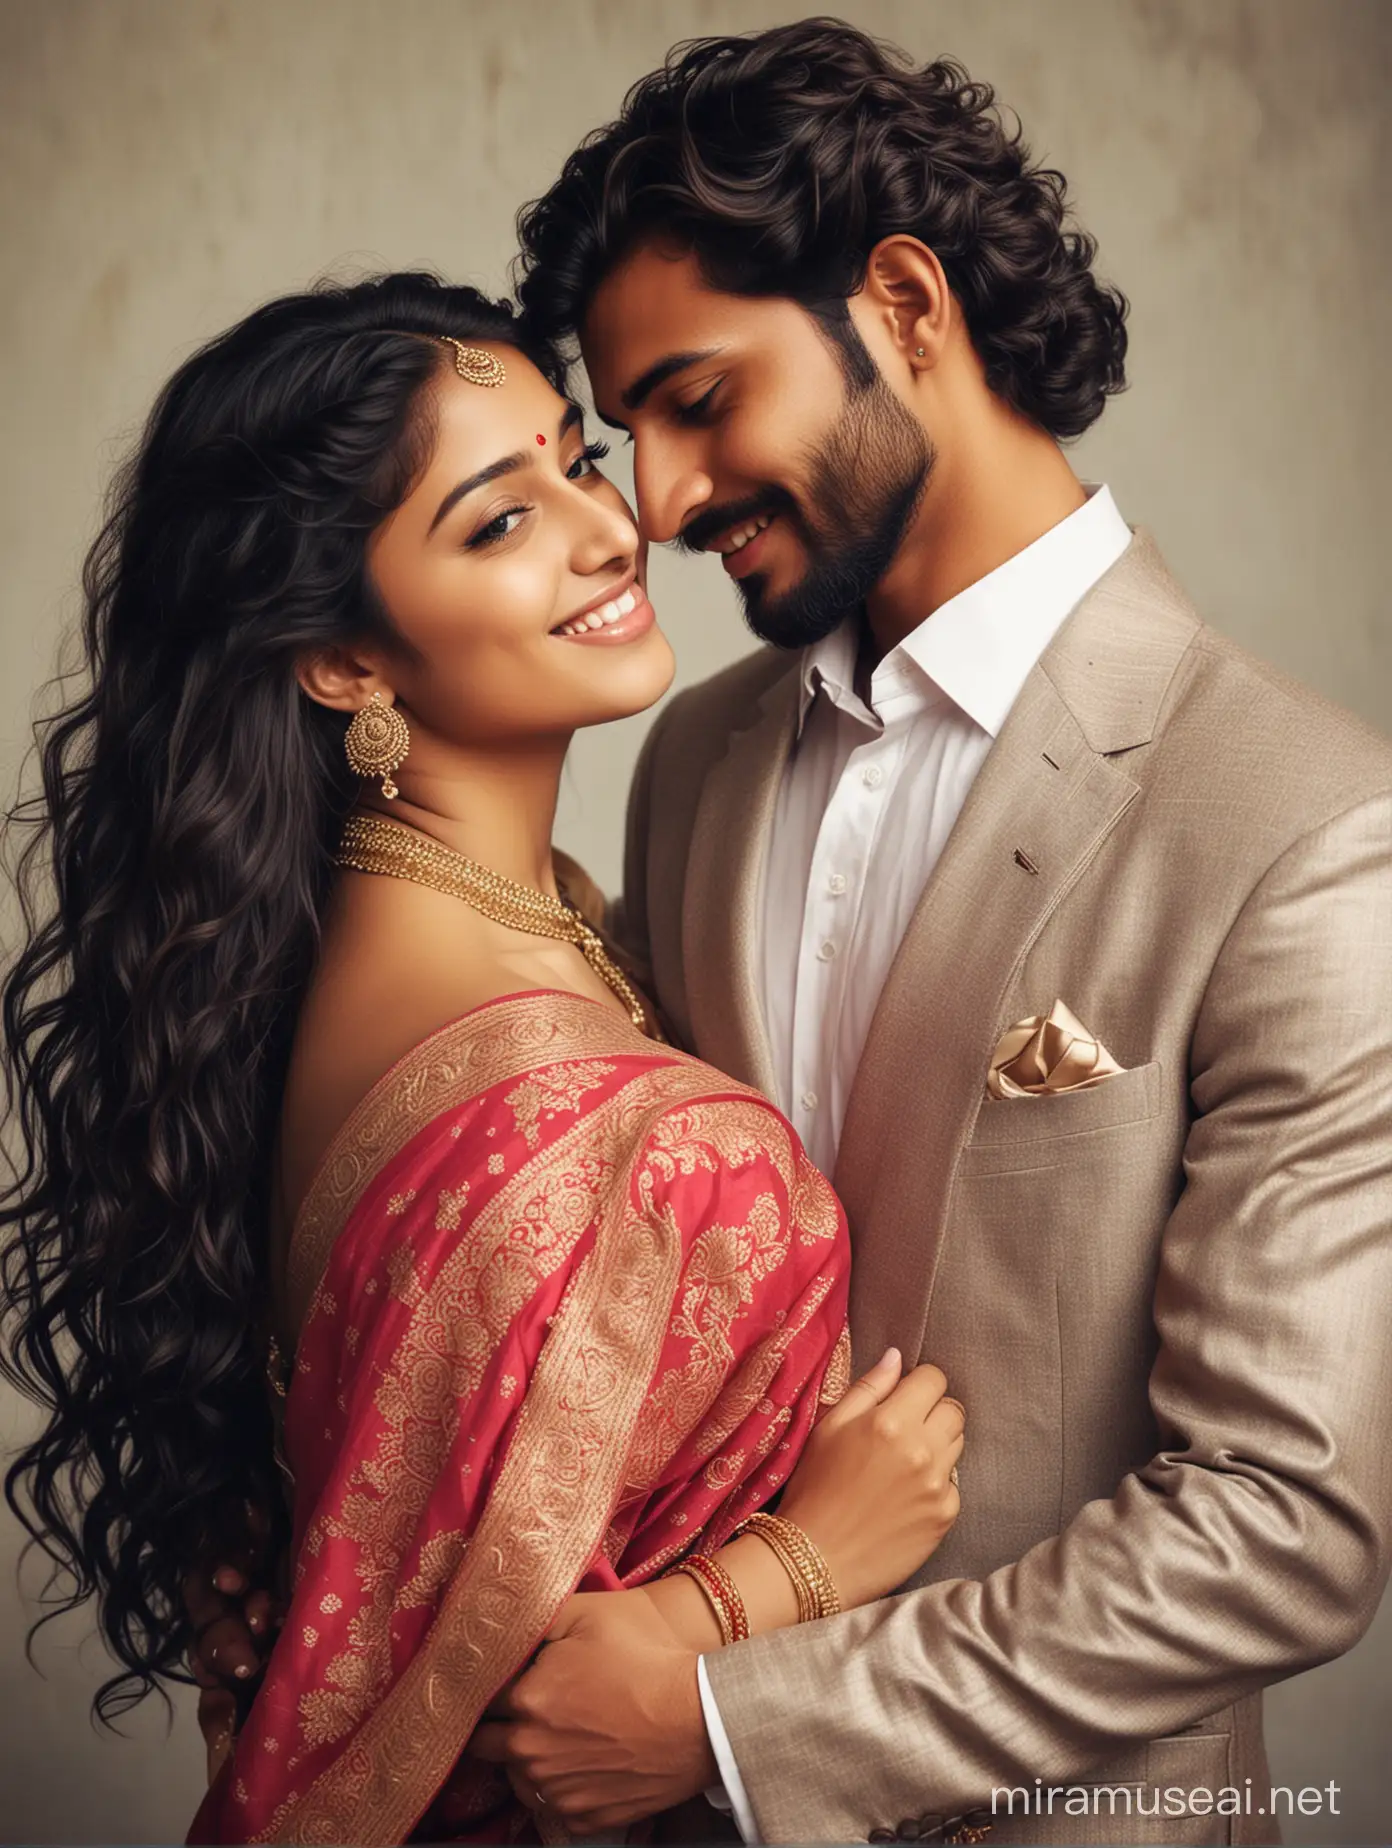 Intimate Indian Couple Embracing Handsome Boy Comforts Beautiful Girl in Elegant Saree